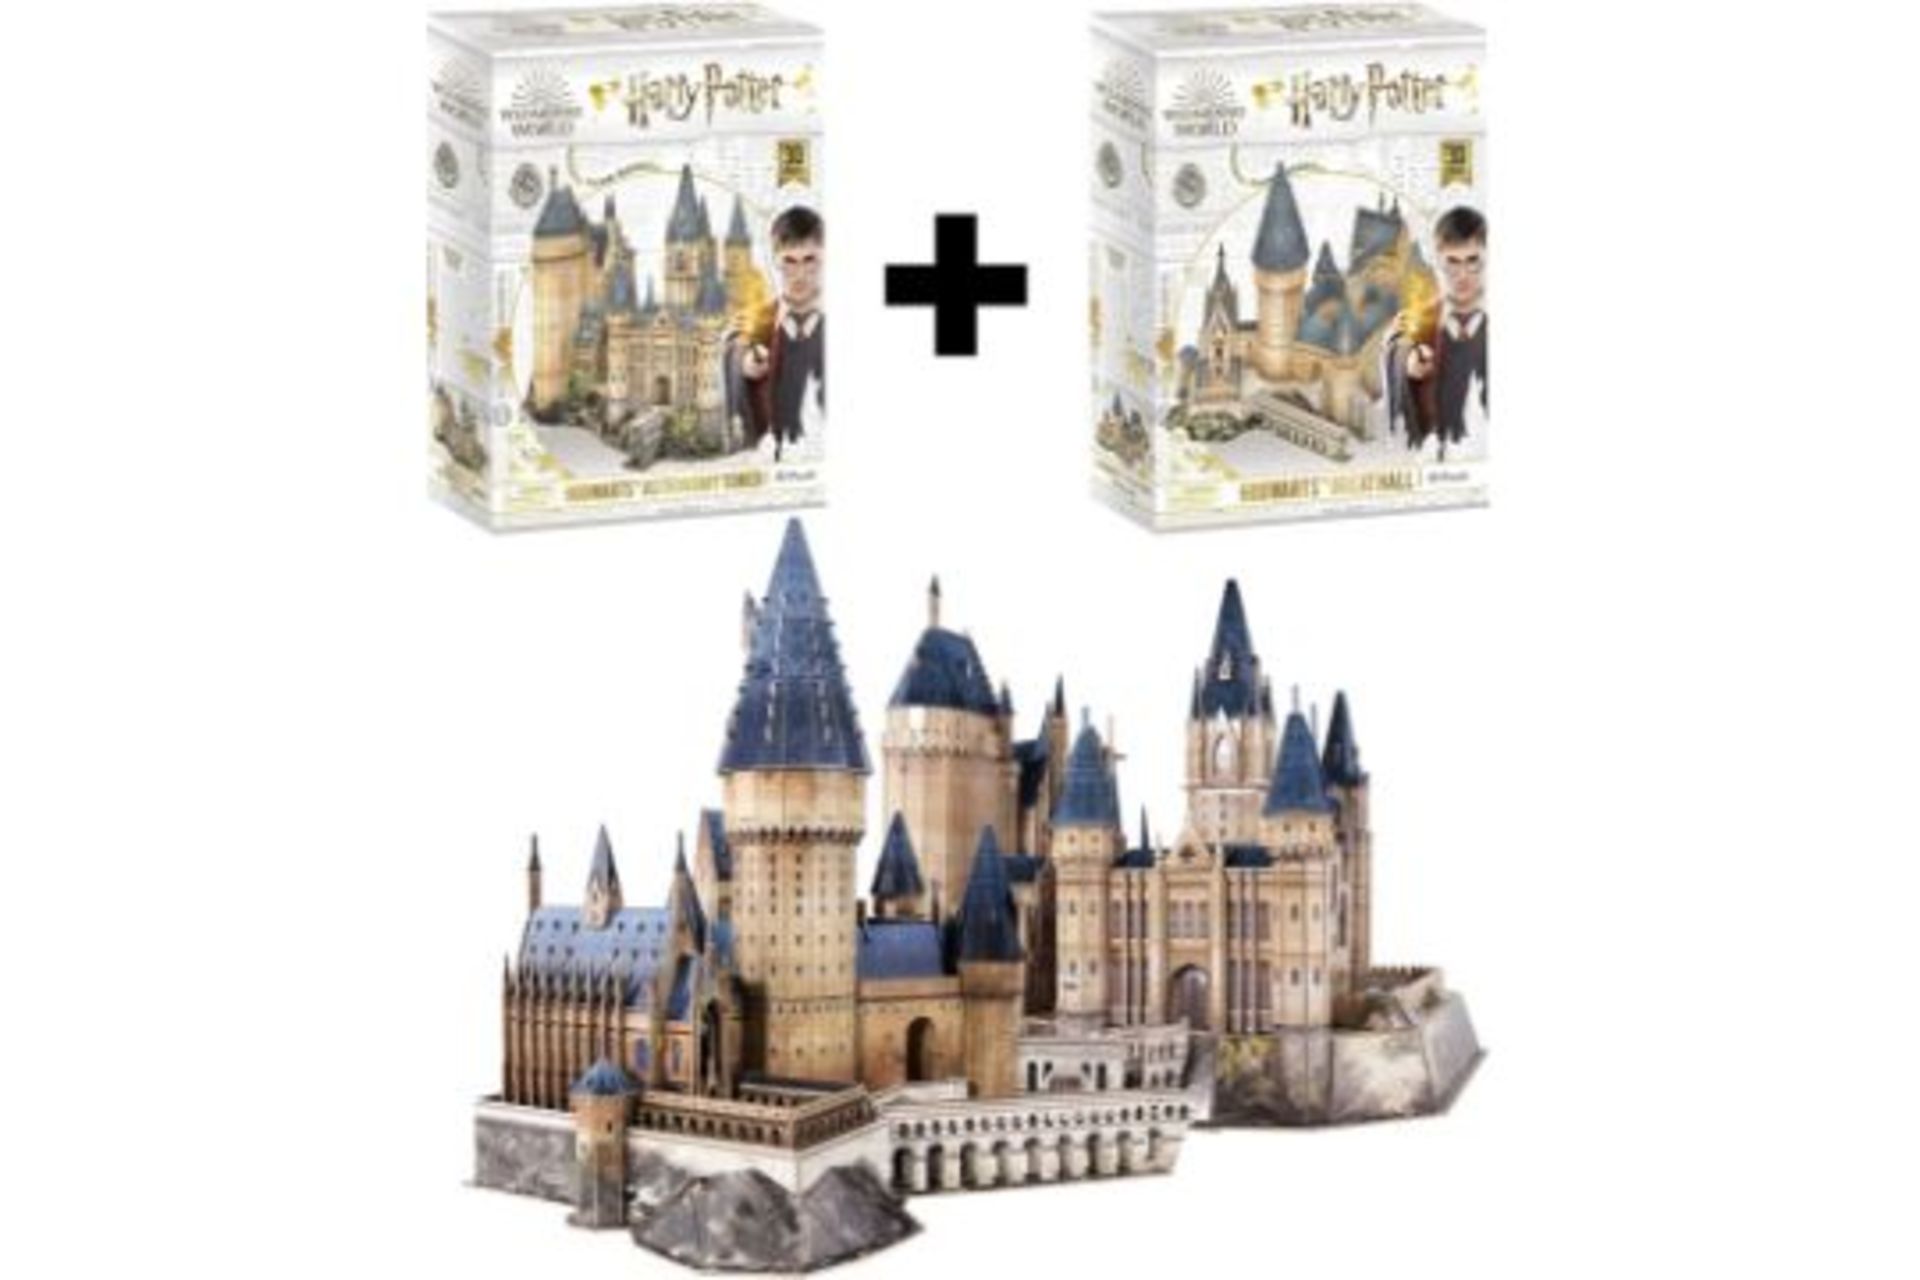 4 X BRAND NEW HARRY POTTER SETS INCLUDING HOGWARTS ASTRONOMY TOWER 3D PUZZLE AND HOGWARTS GRETA HALL